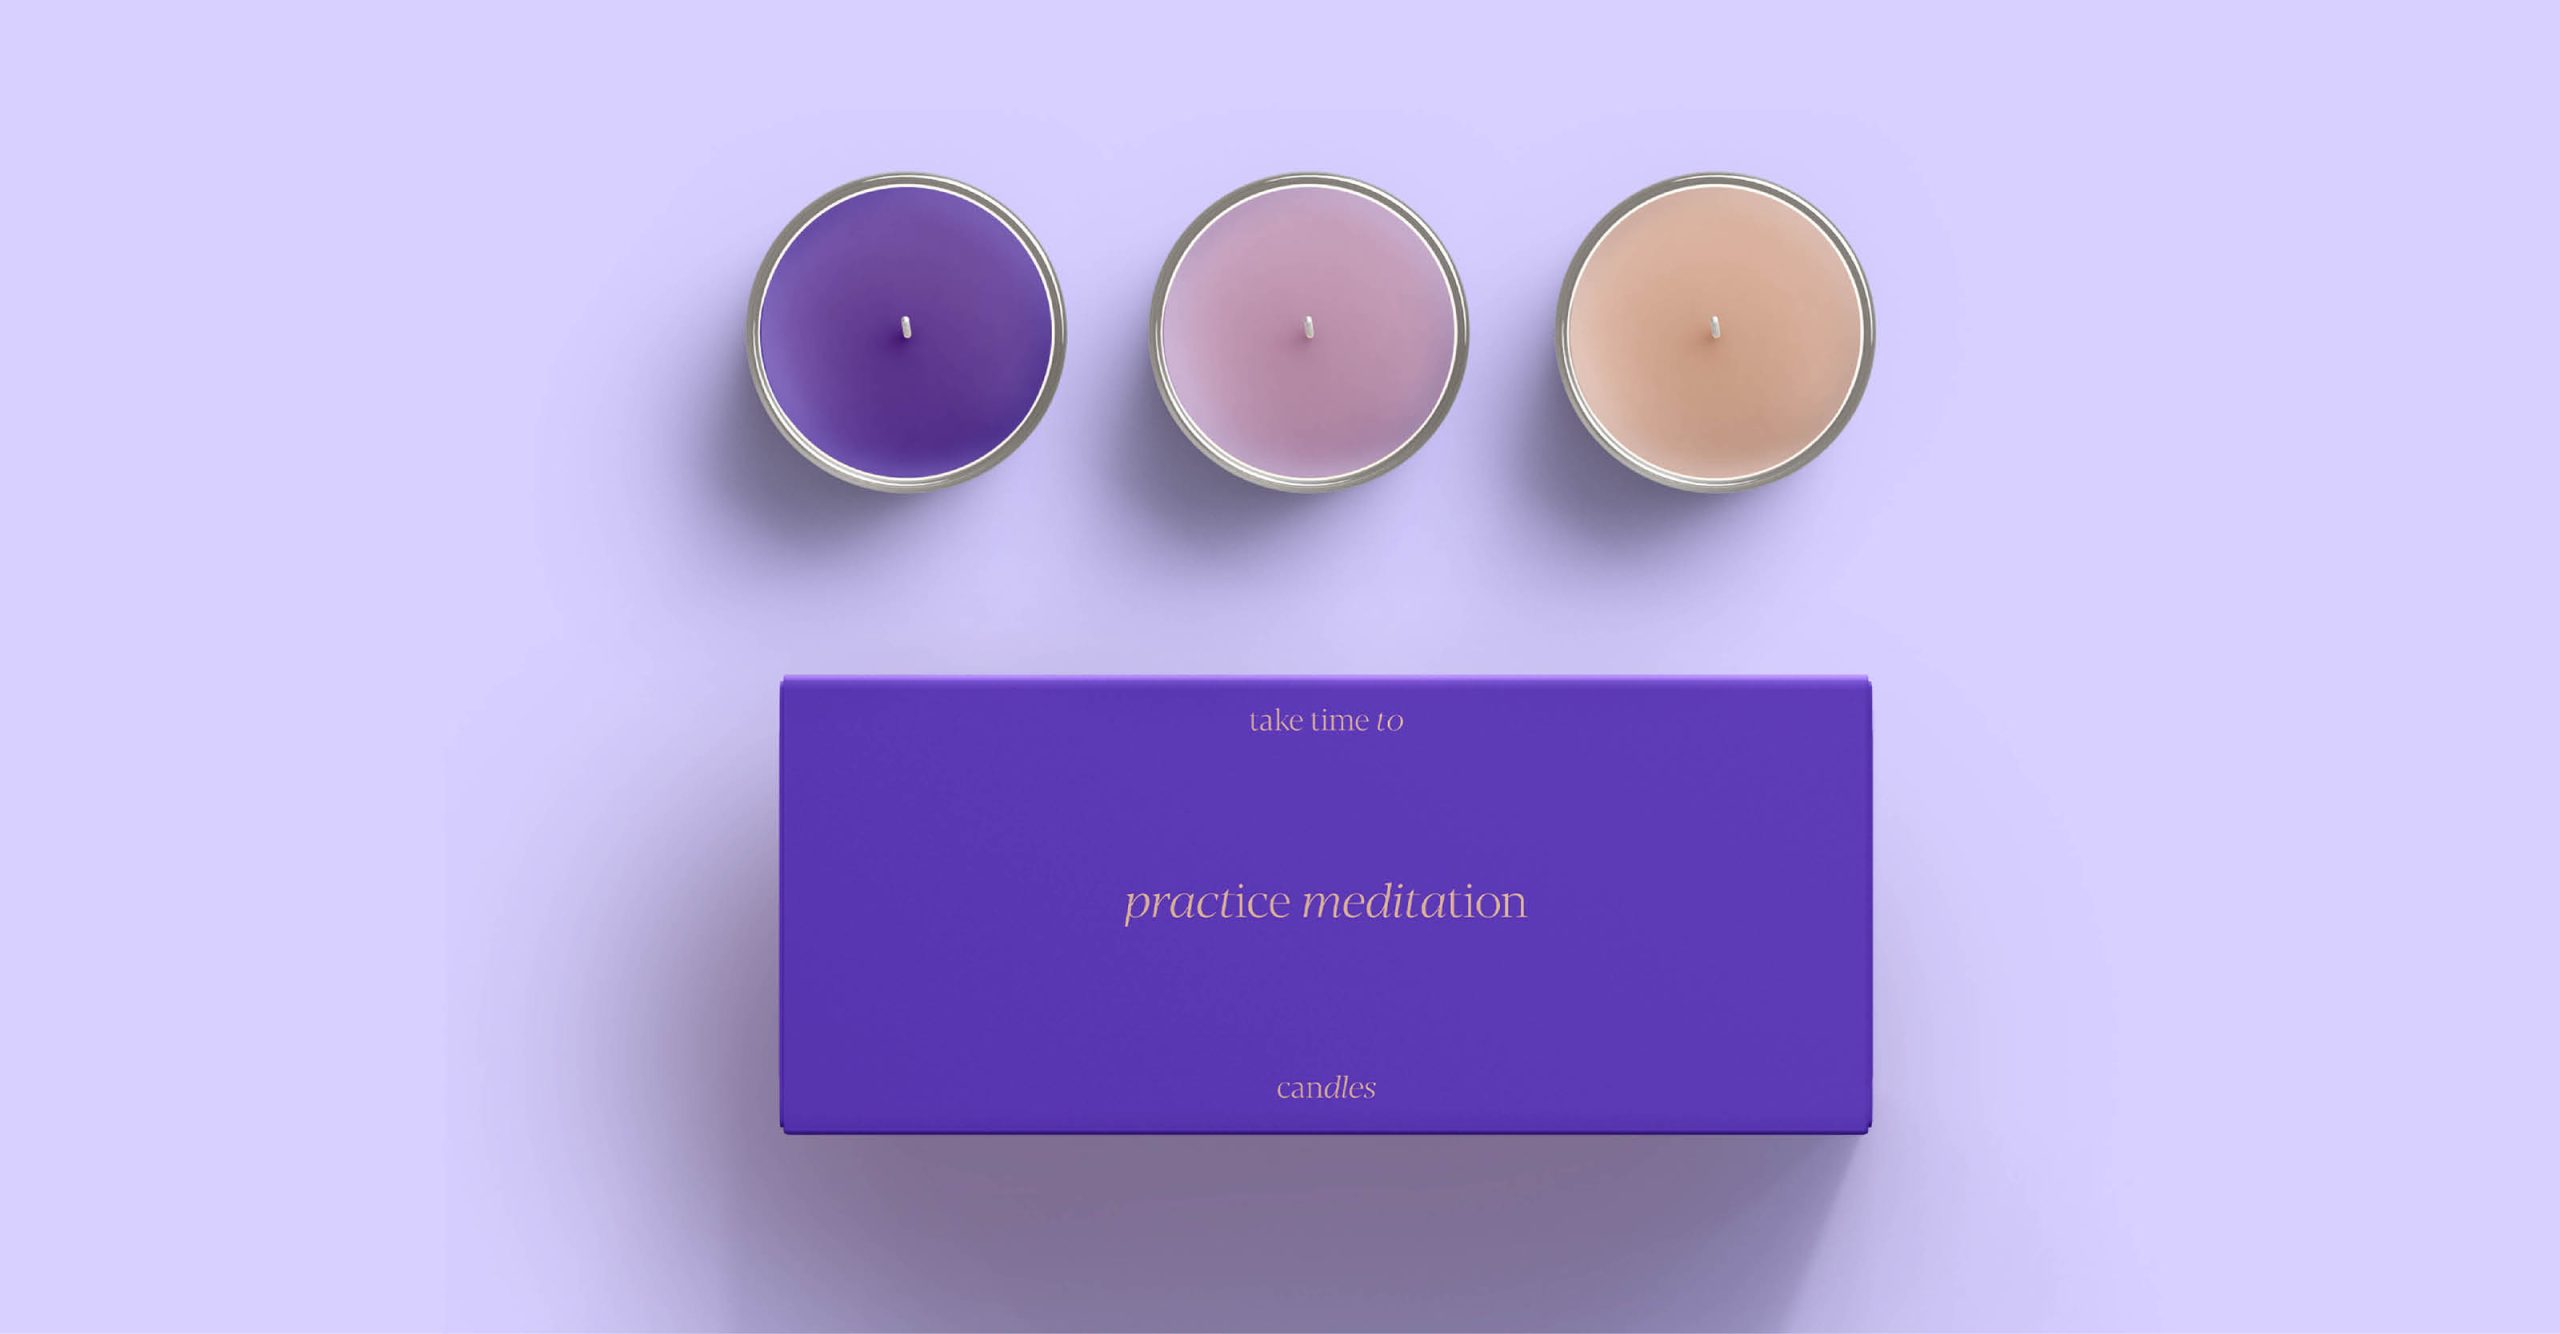 packaging_design_bloome_candles_meditation